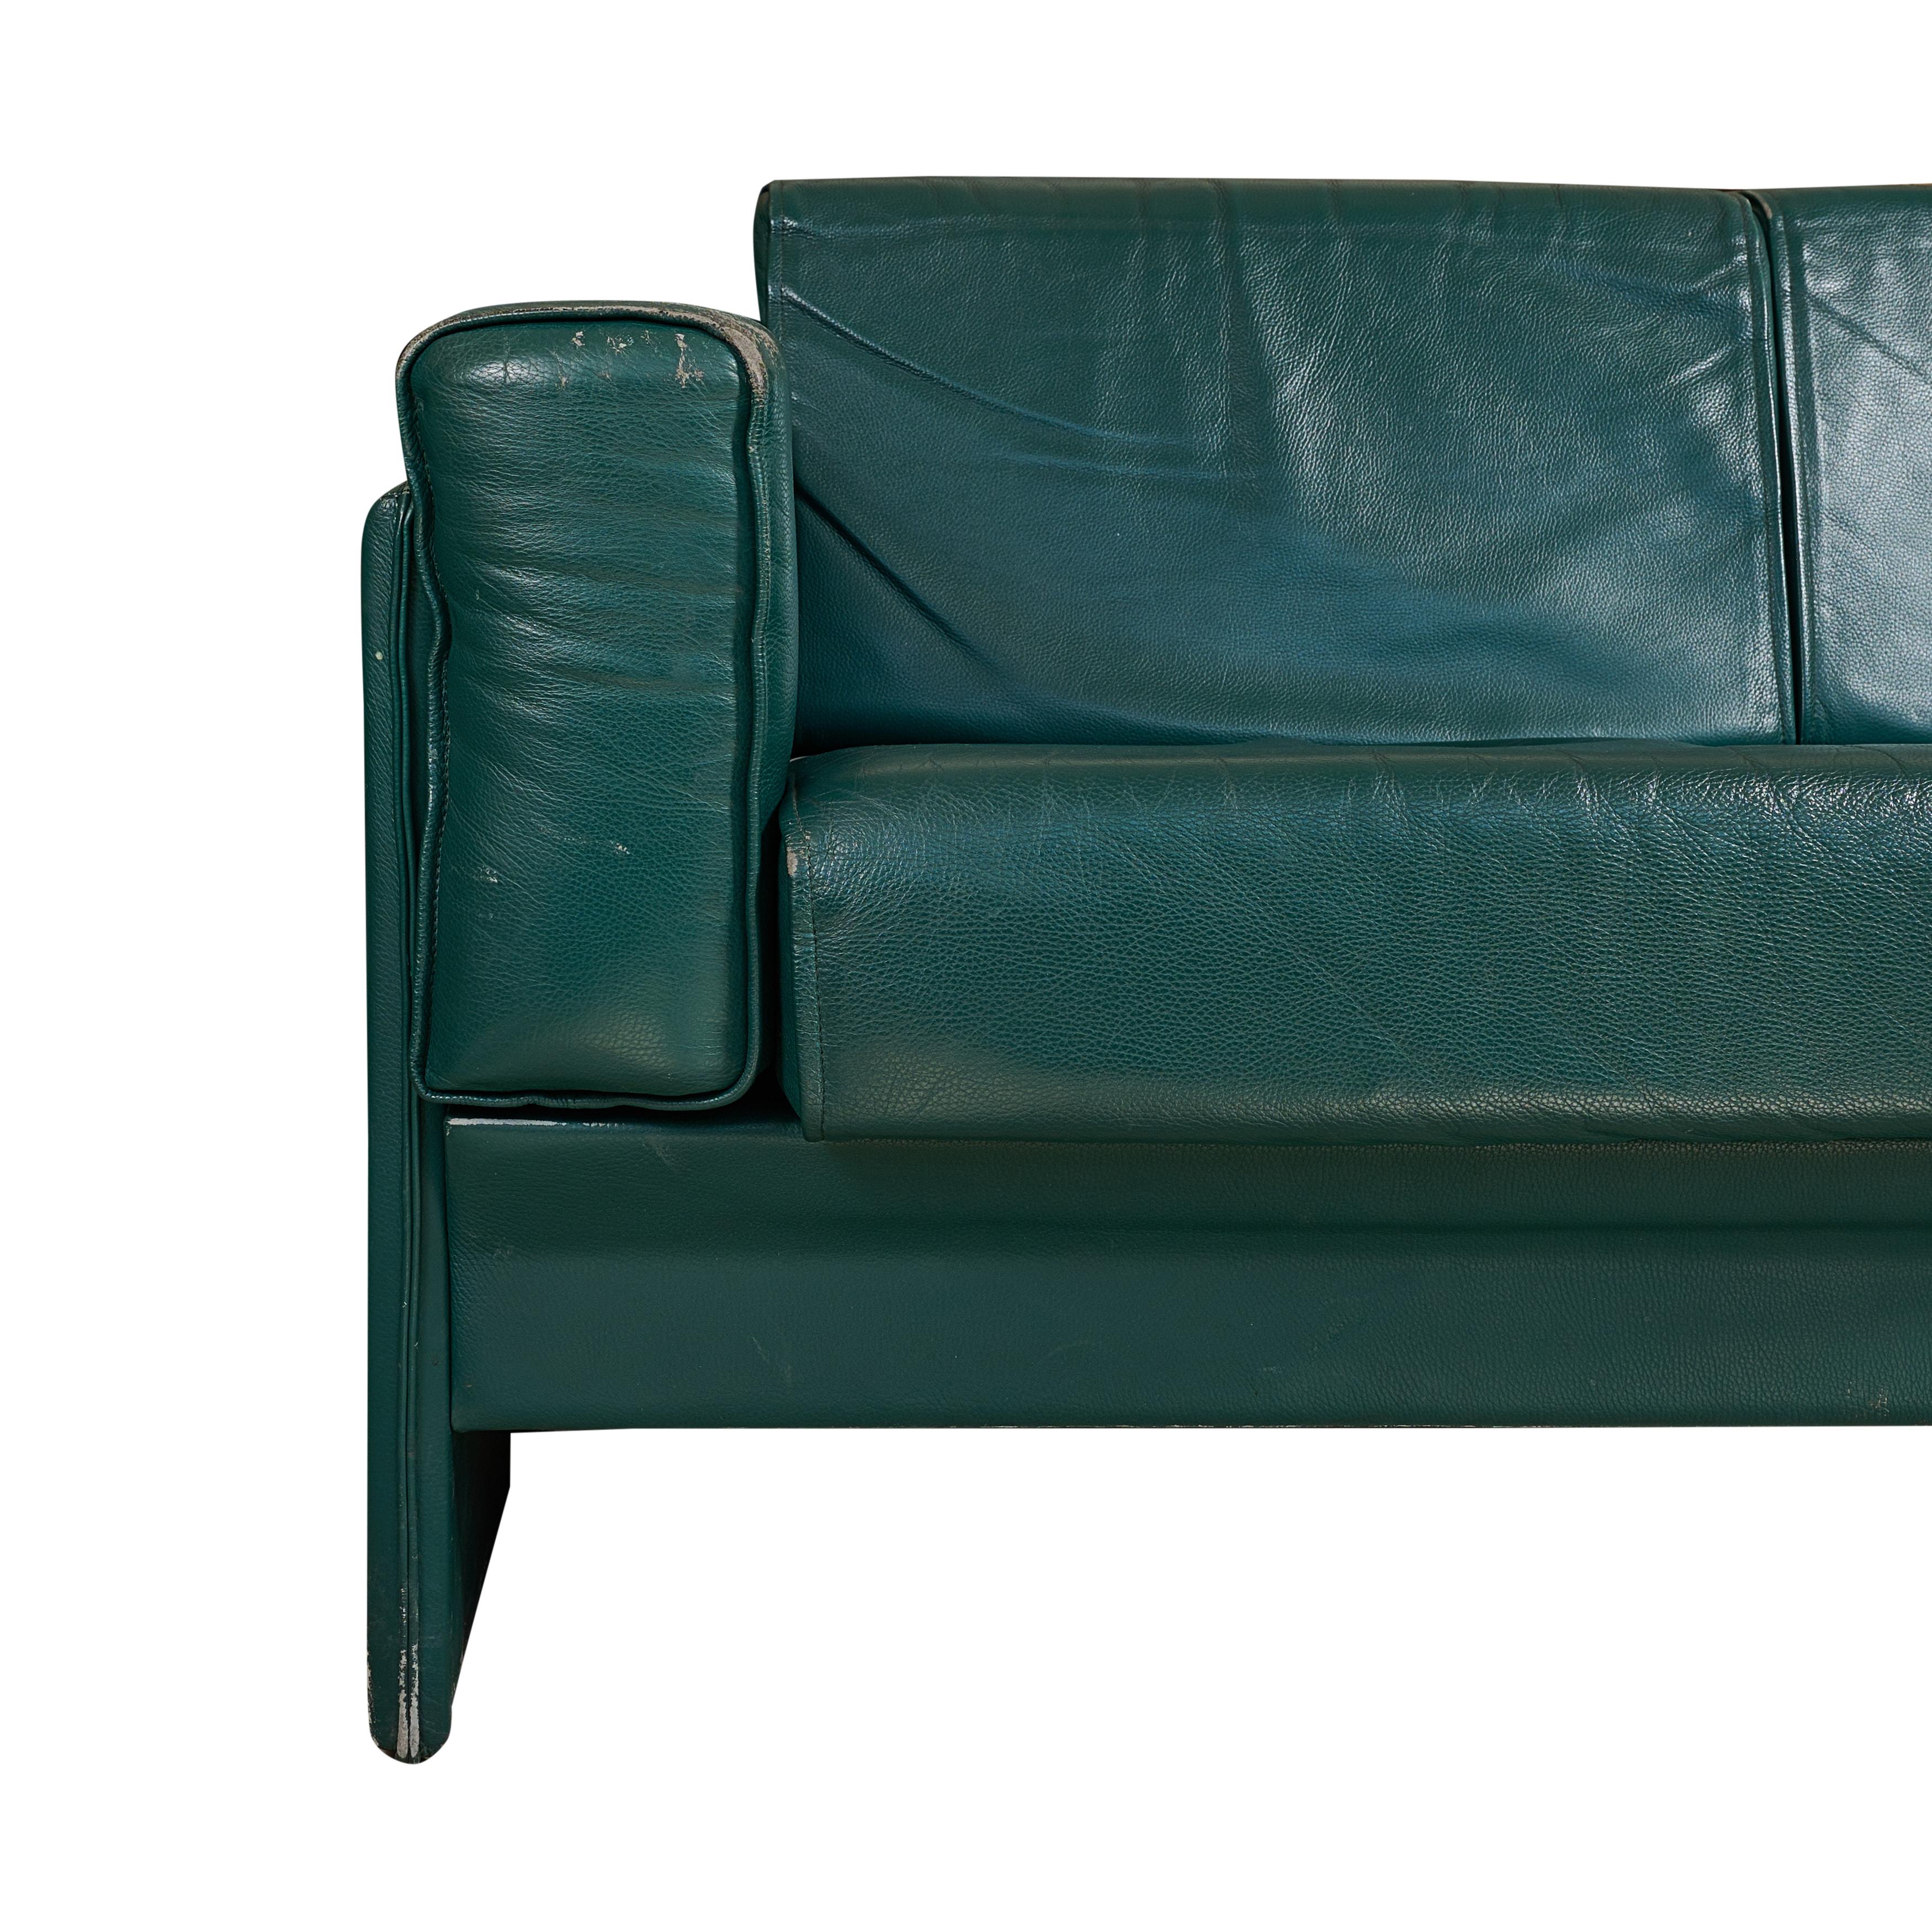 Midcentury, green leather, two seat sofa from a Milan airport.